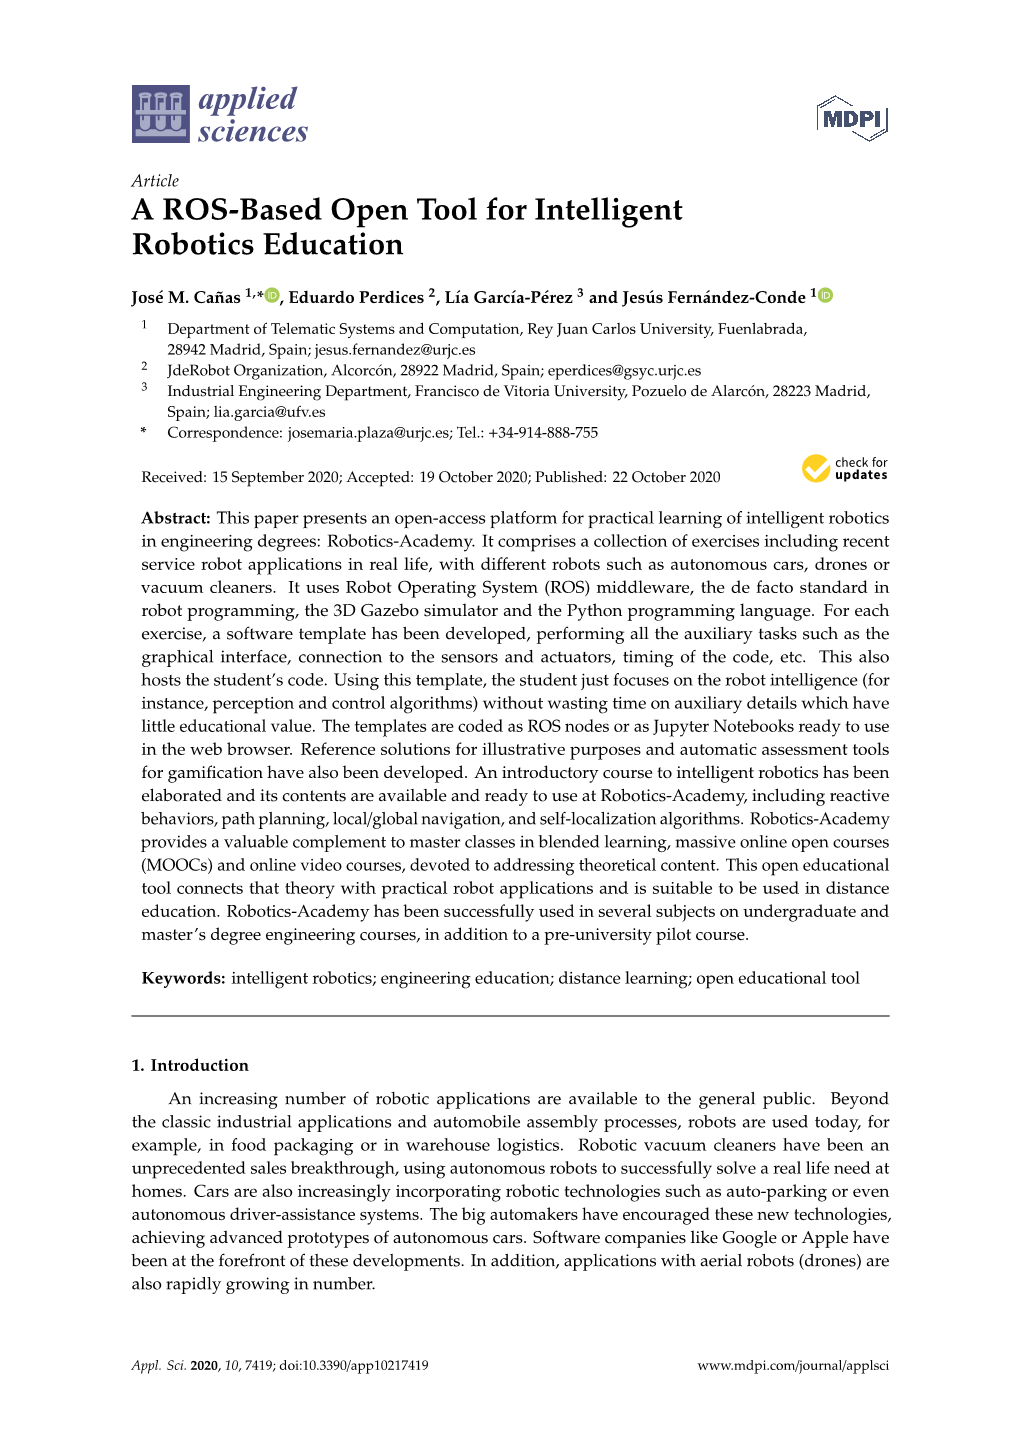 A ROS-Based Open Tool for Intelligent Robotics Education